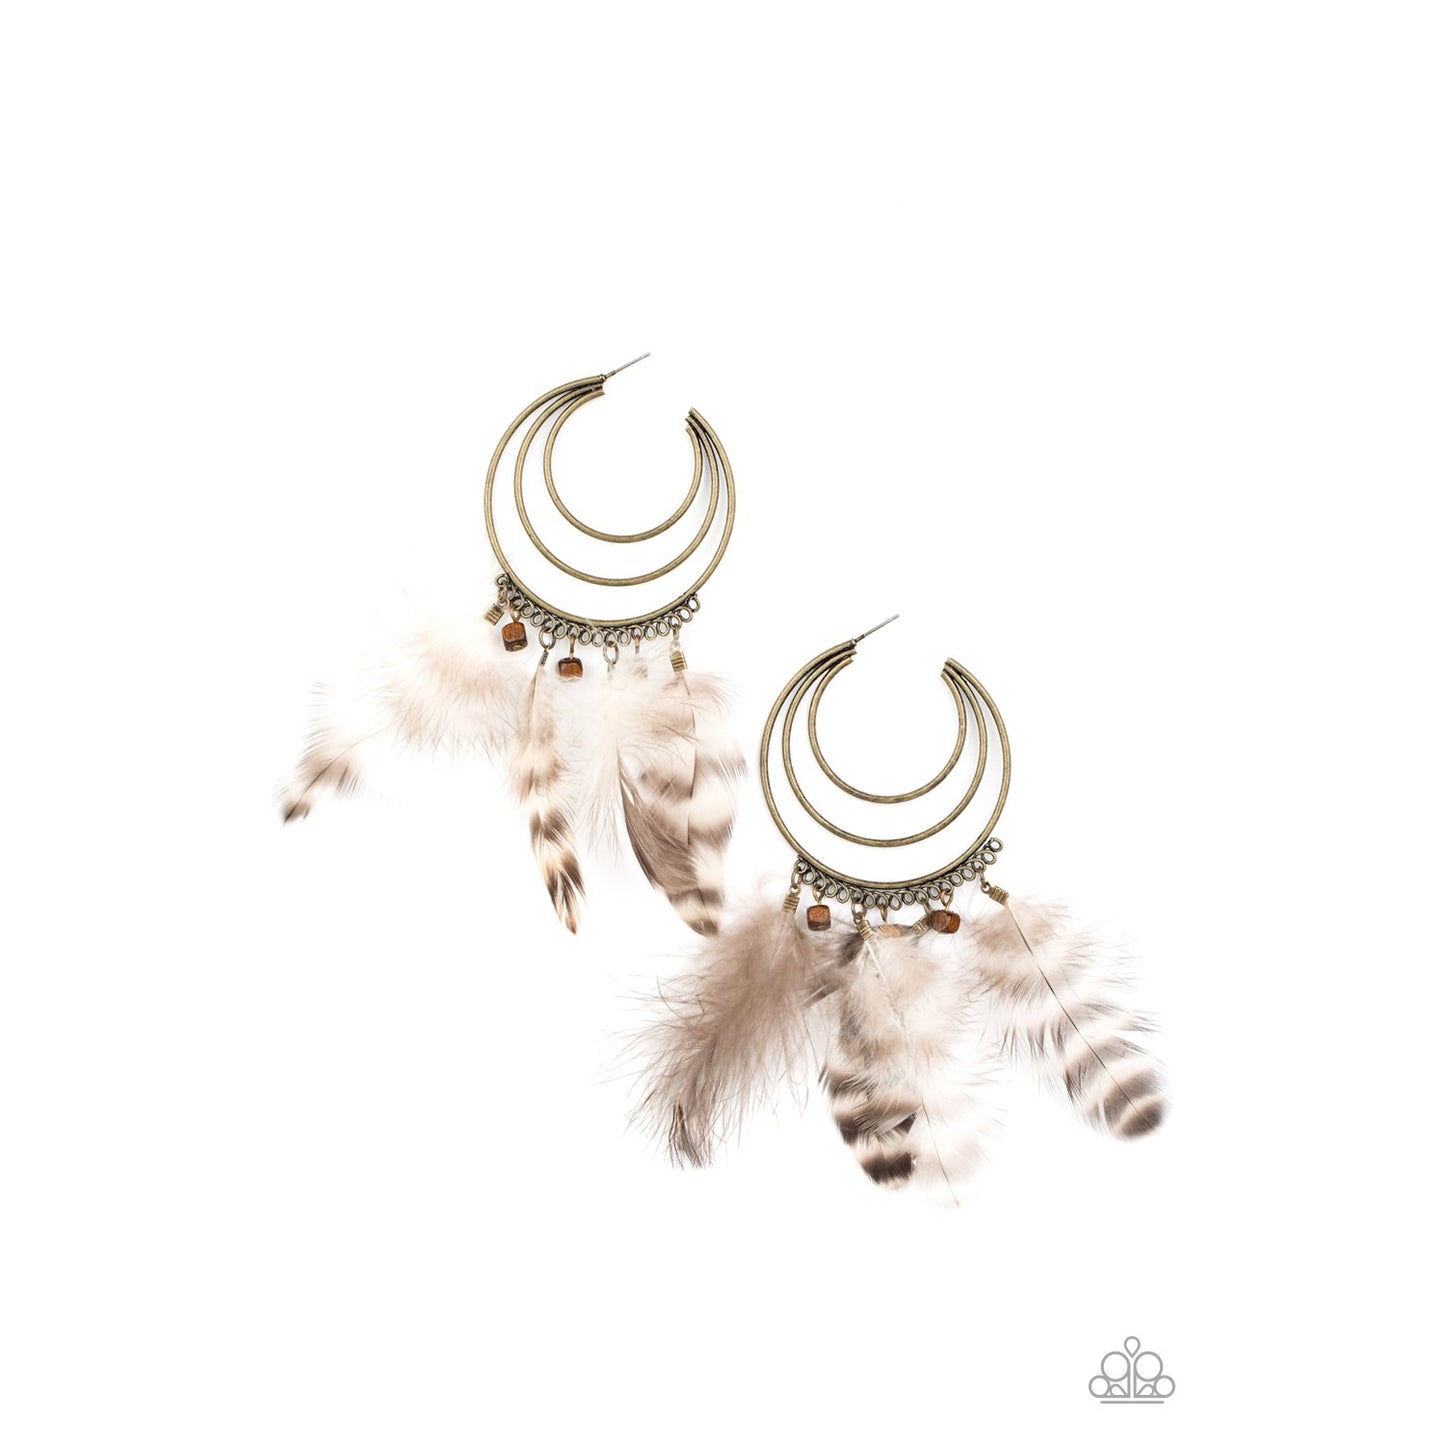 Freely Free Bird - Brass and Feathers Earrings - Paparazzi Accessories - GlaMarous Titi Jewels